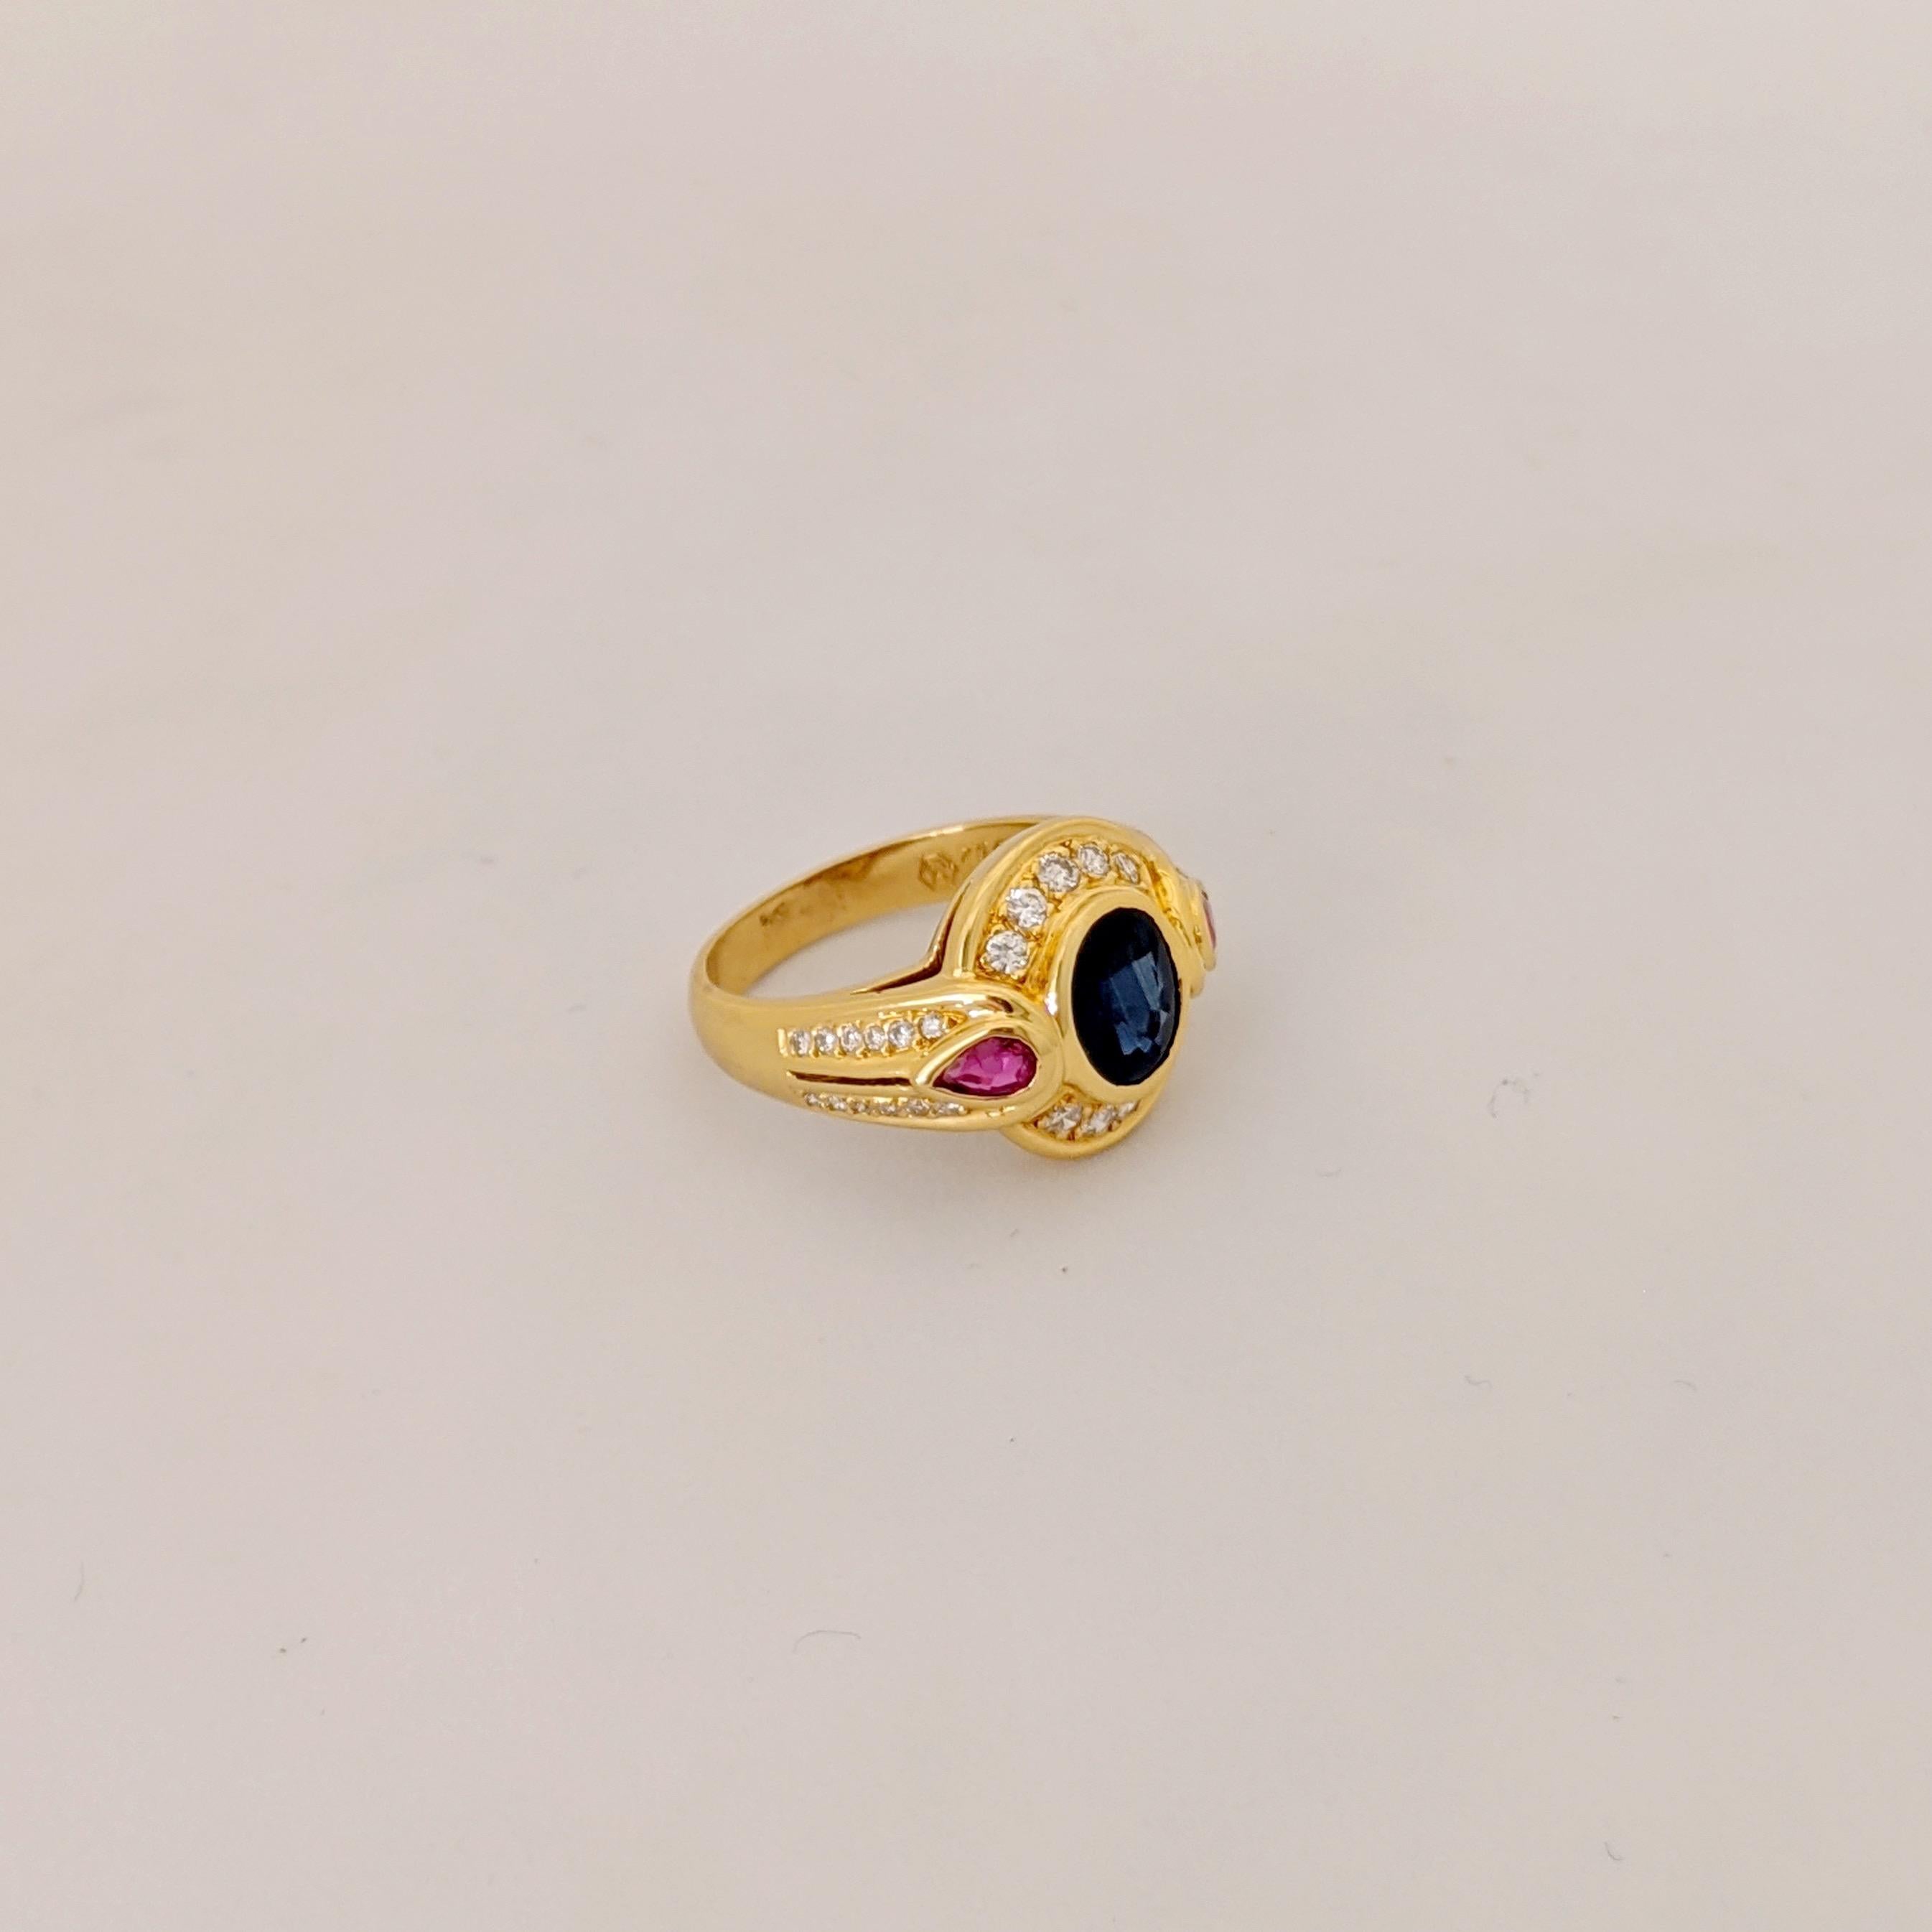 Oval Cut CarreraYCarrera 18kt Gold Ring with 1.65Ct Oval Blue Sapphire, Ruby and Diamonds